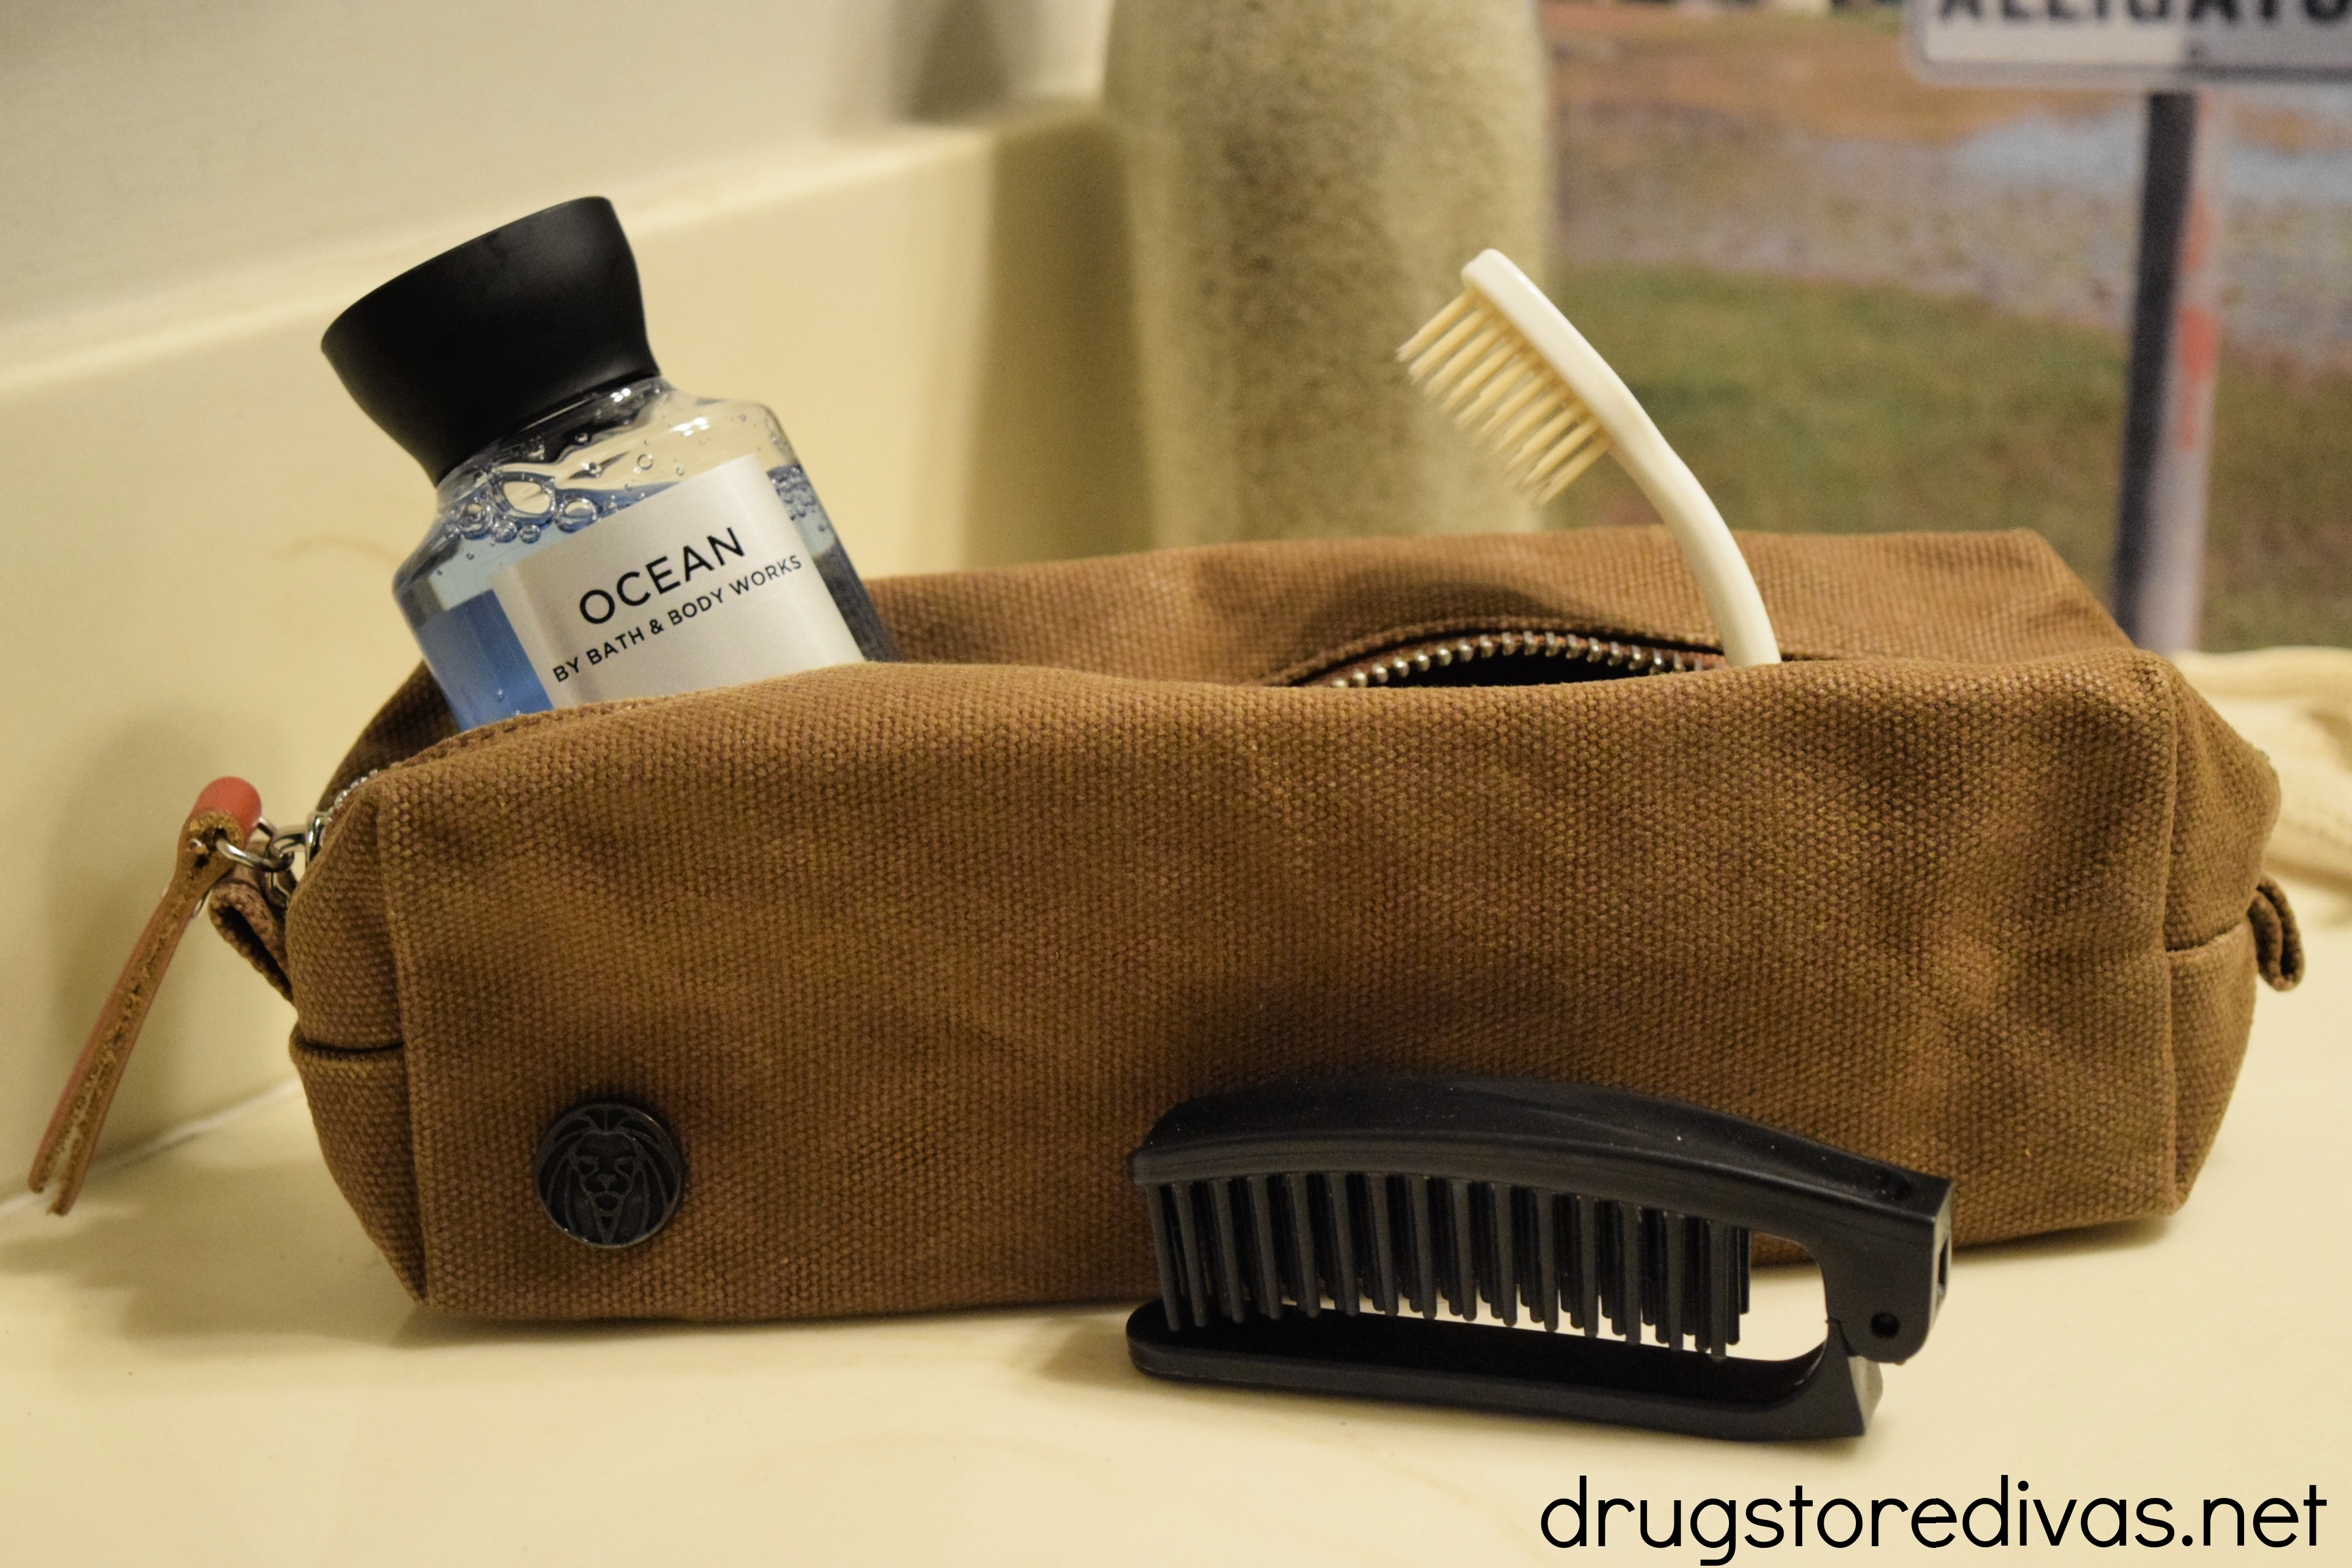 Travel bag with a brush in front and a toothbrush and body wash inside.